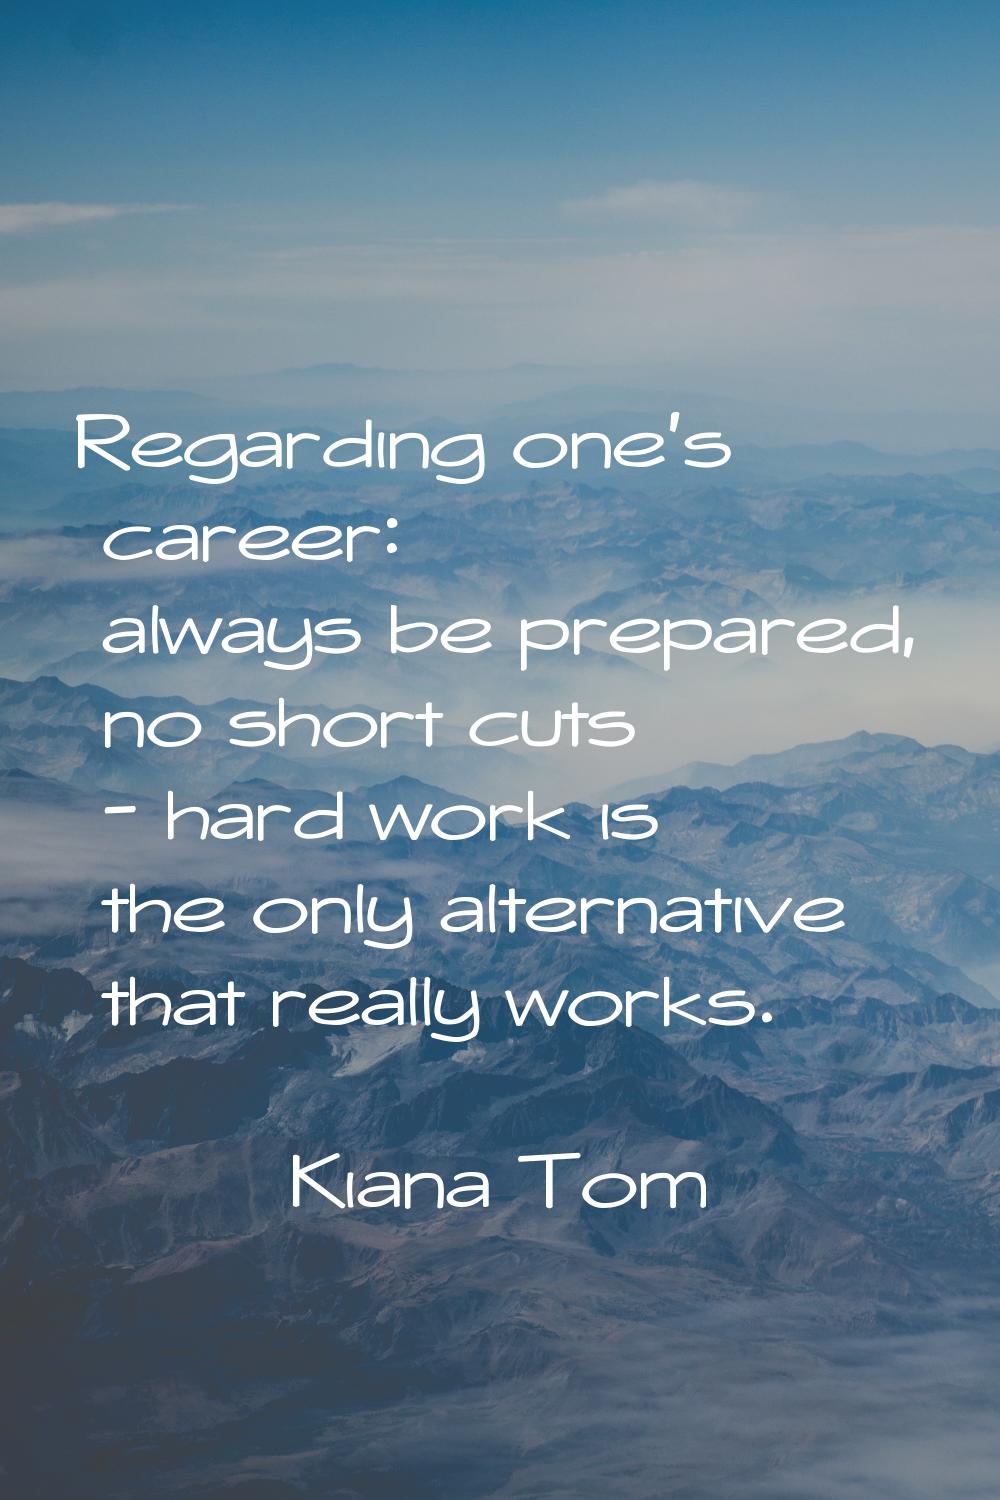 Regarding one's career: always be prepared, no short cuts - hard work is the only alternative that 